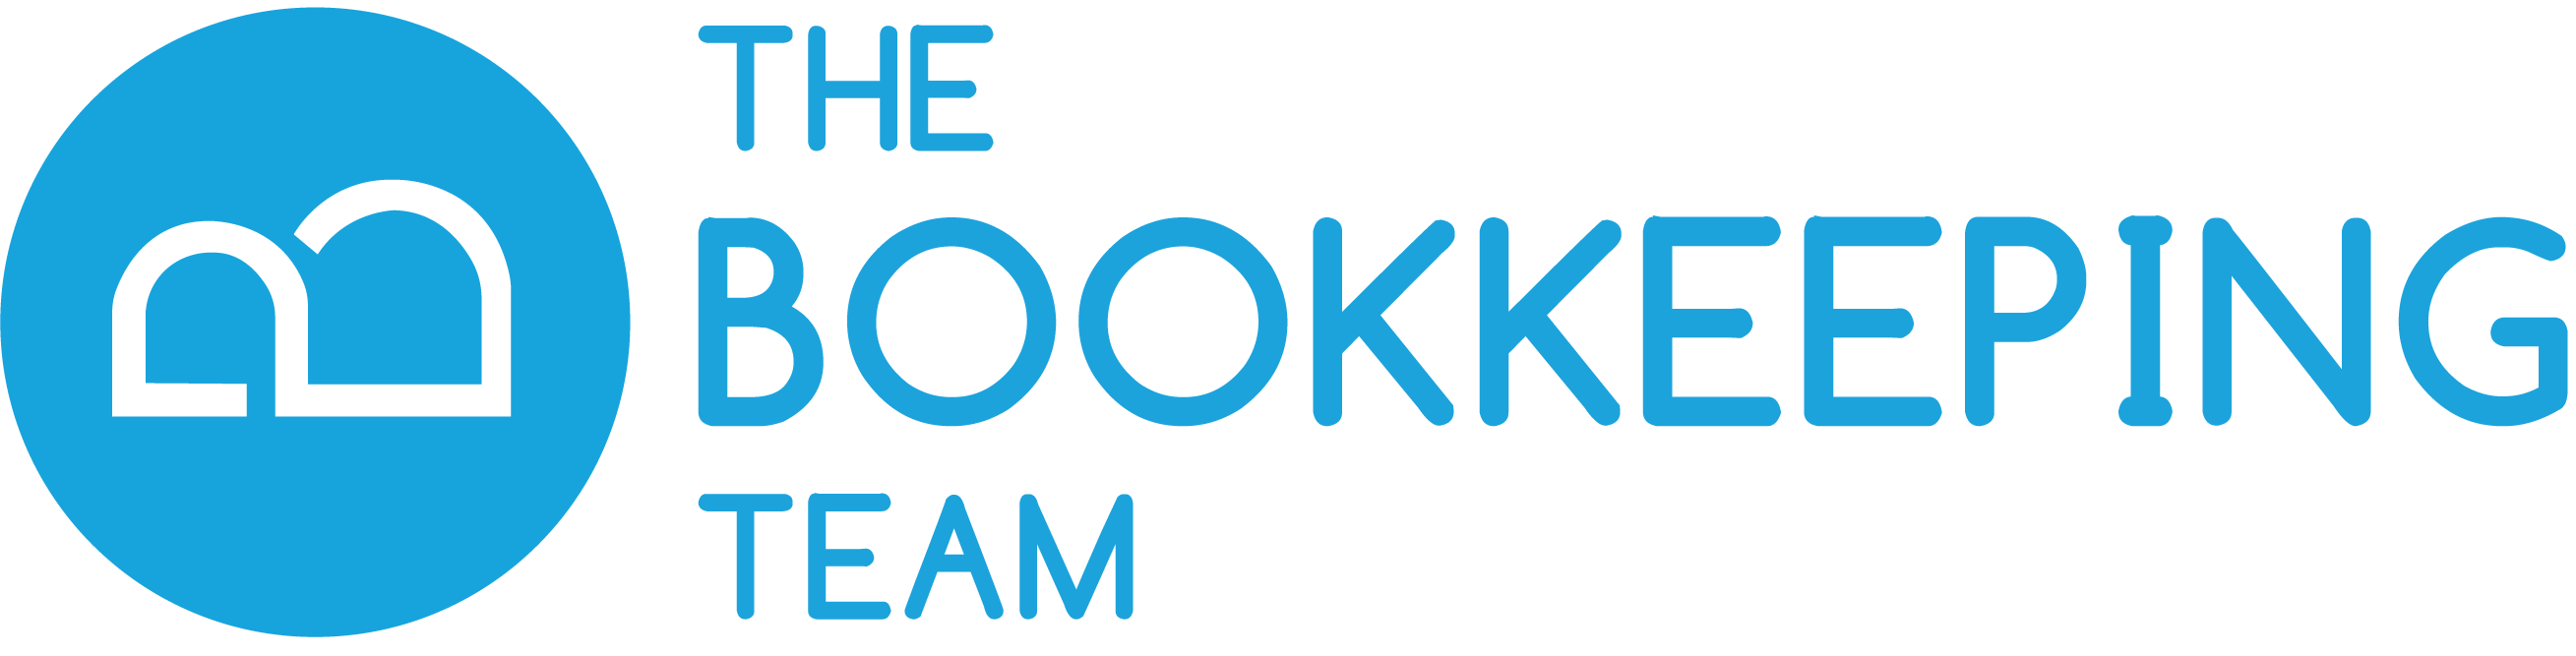 cropped-The-Bookkeping-Team-Logo-3.png